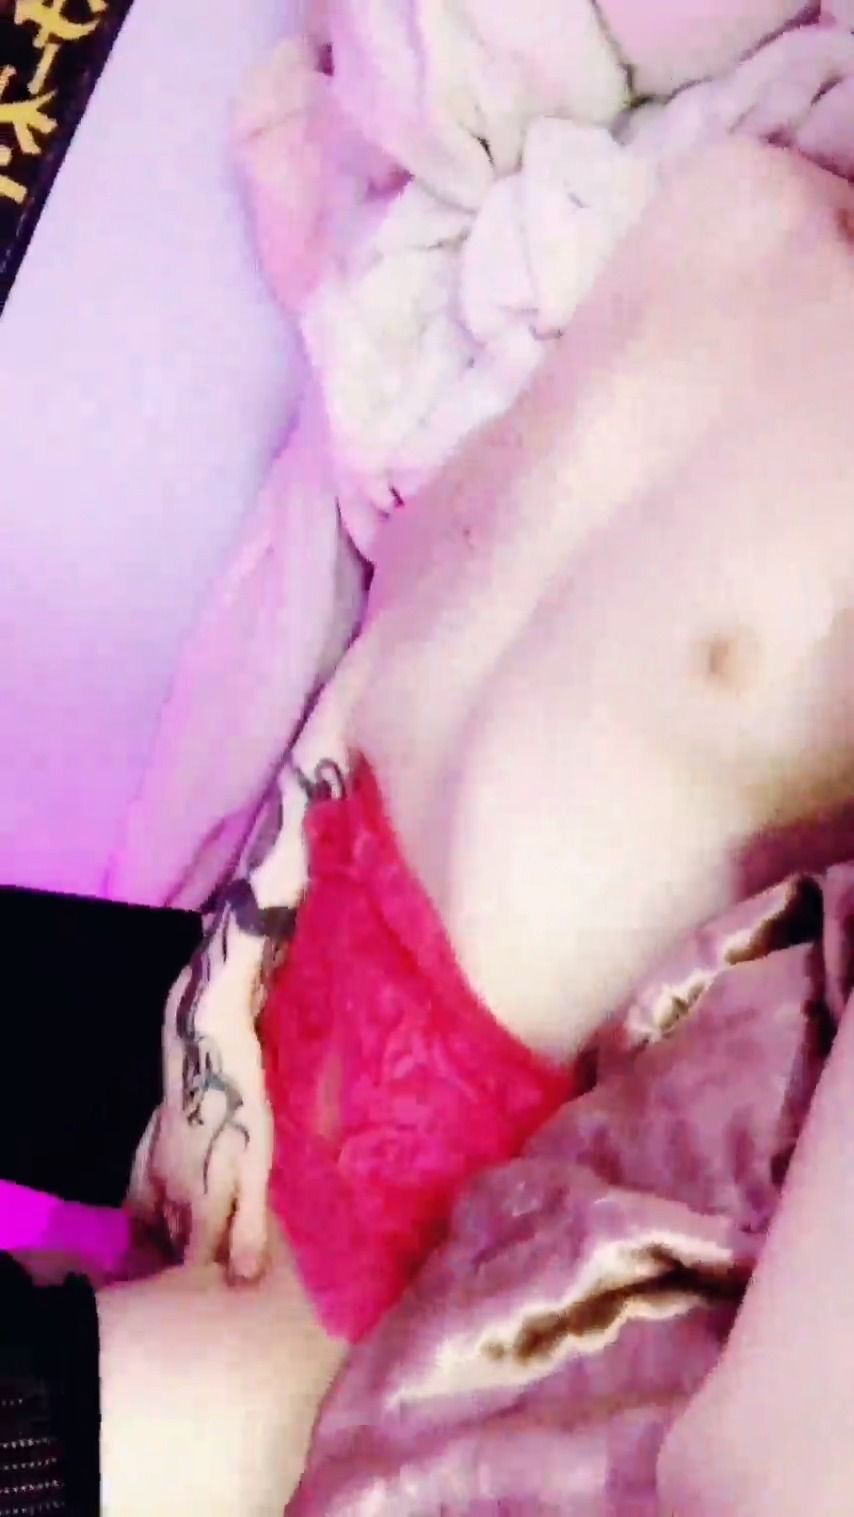 solo tease and cum